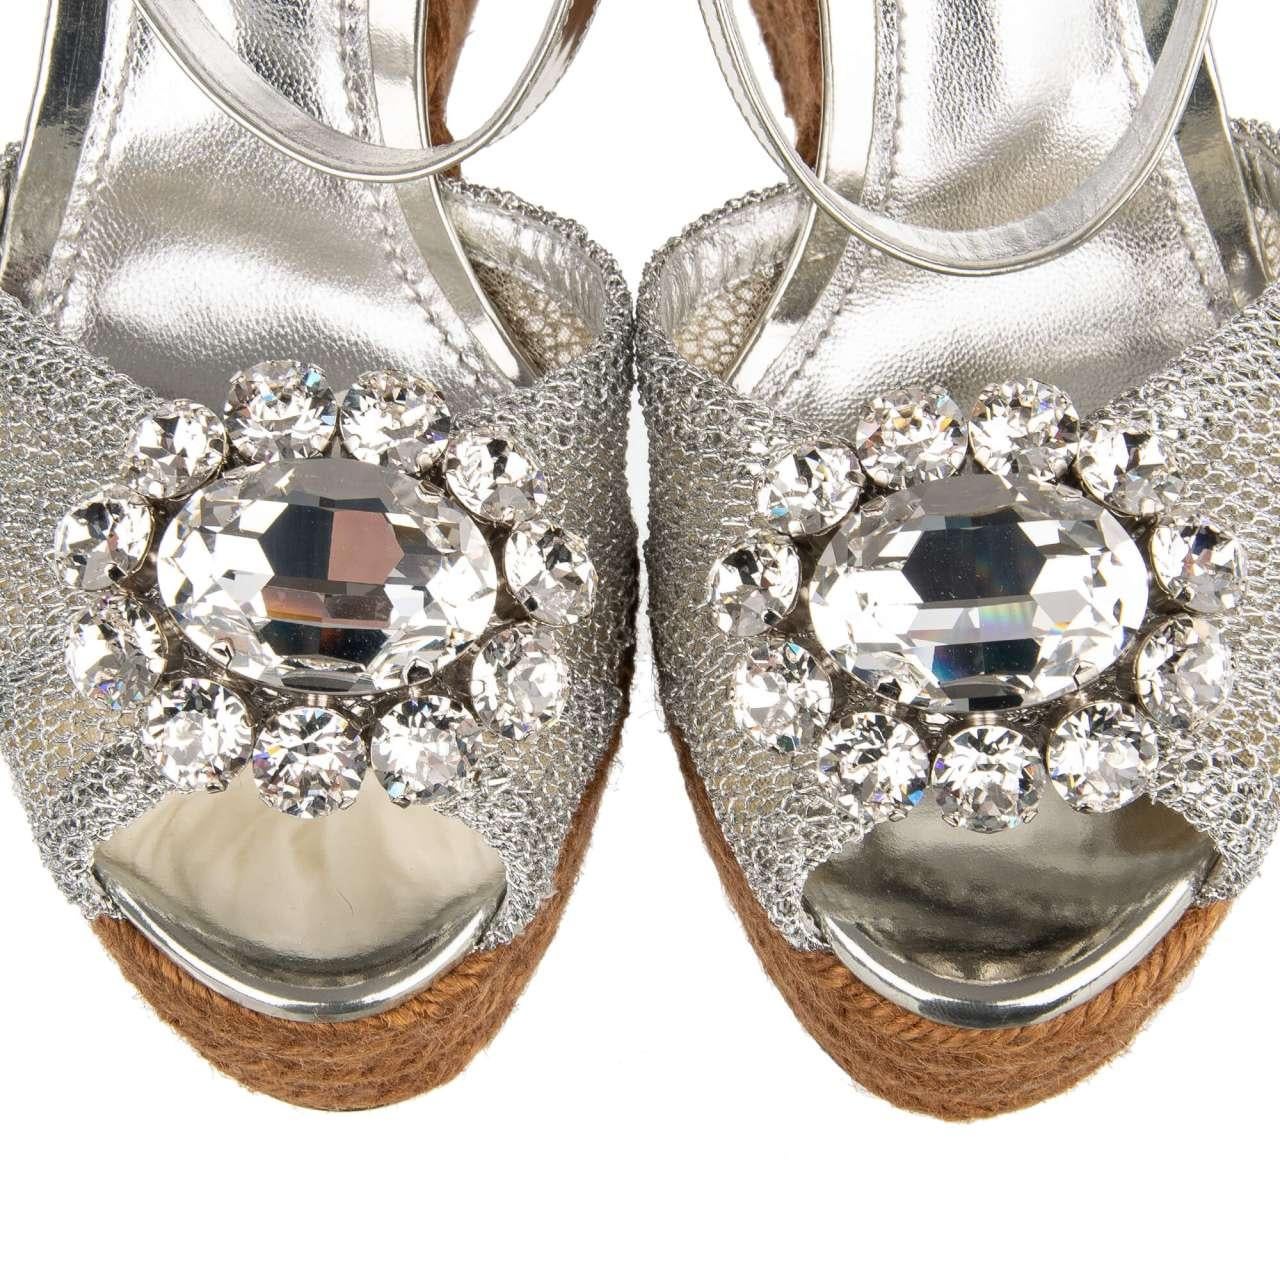 - Woven Plateau Sandals / Wedges BIANCA embellished with crystal brooch in silver by DOLCE & GABBANA - RUNWAY - Dolce&Gabbana Fashion Show - MADE IN ITALY - New with Box - Model: CZ0220-AA130-80998 - Material: 75% Polyester, 25% Calfskin - Sole: